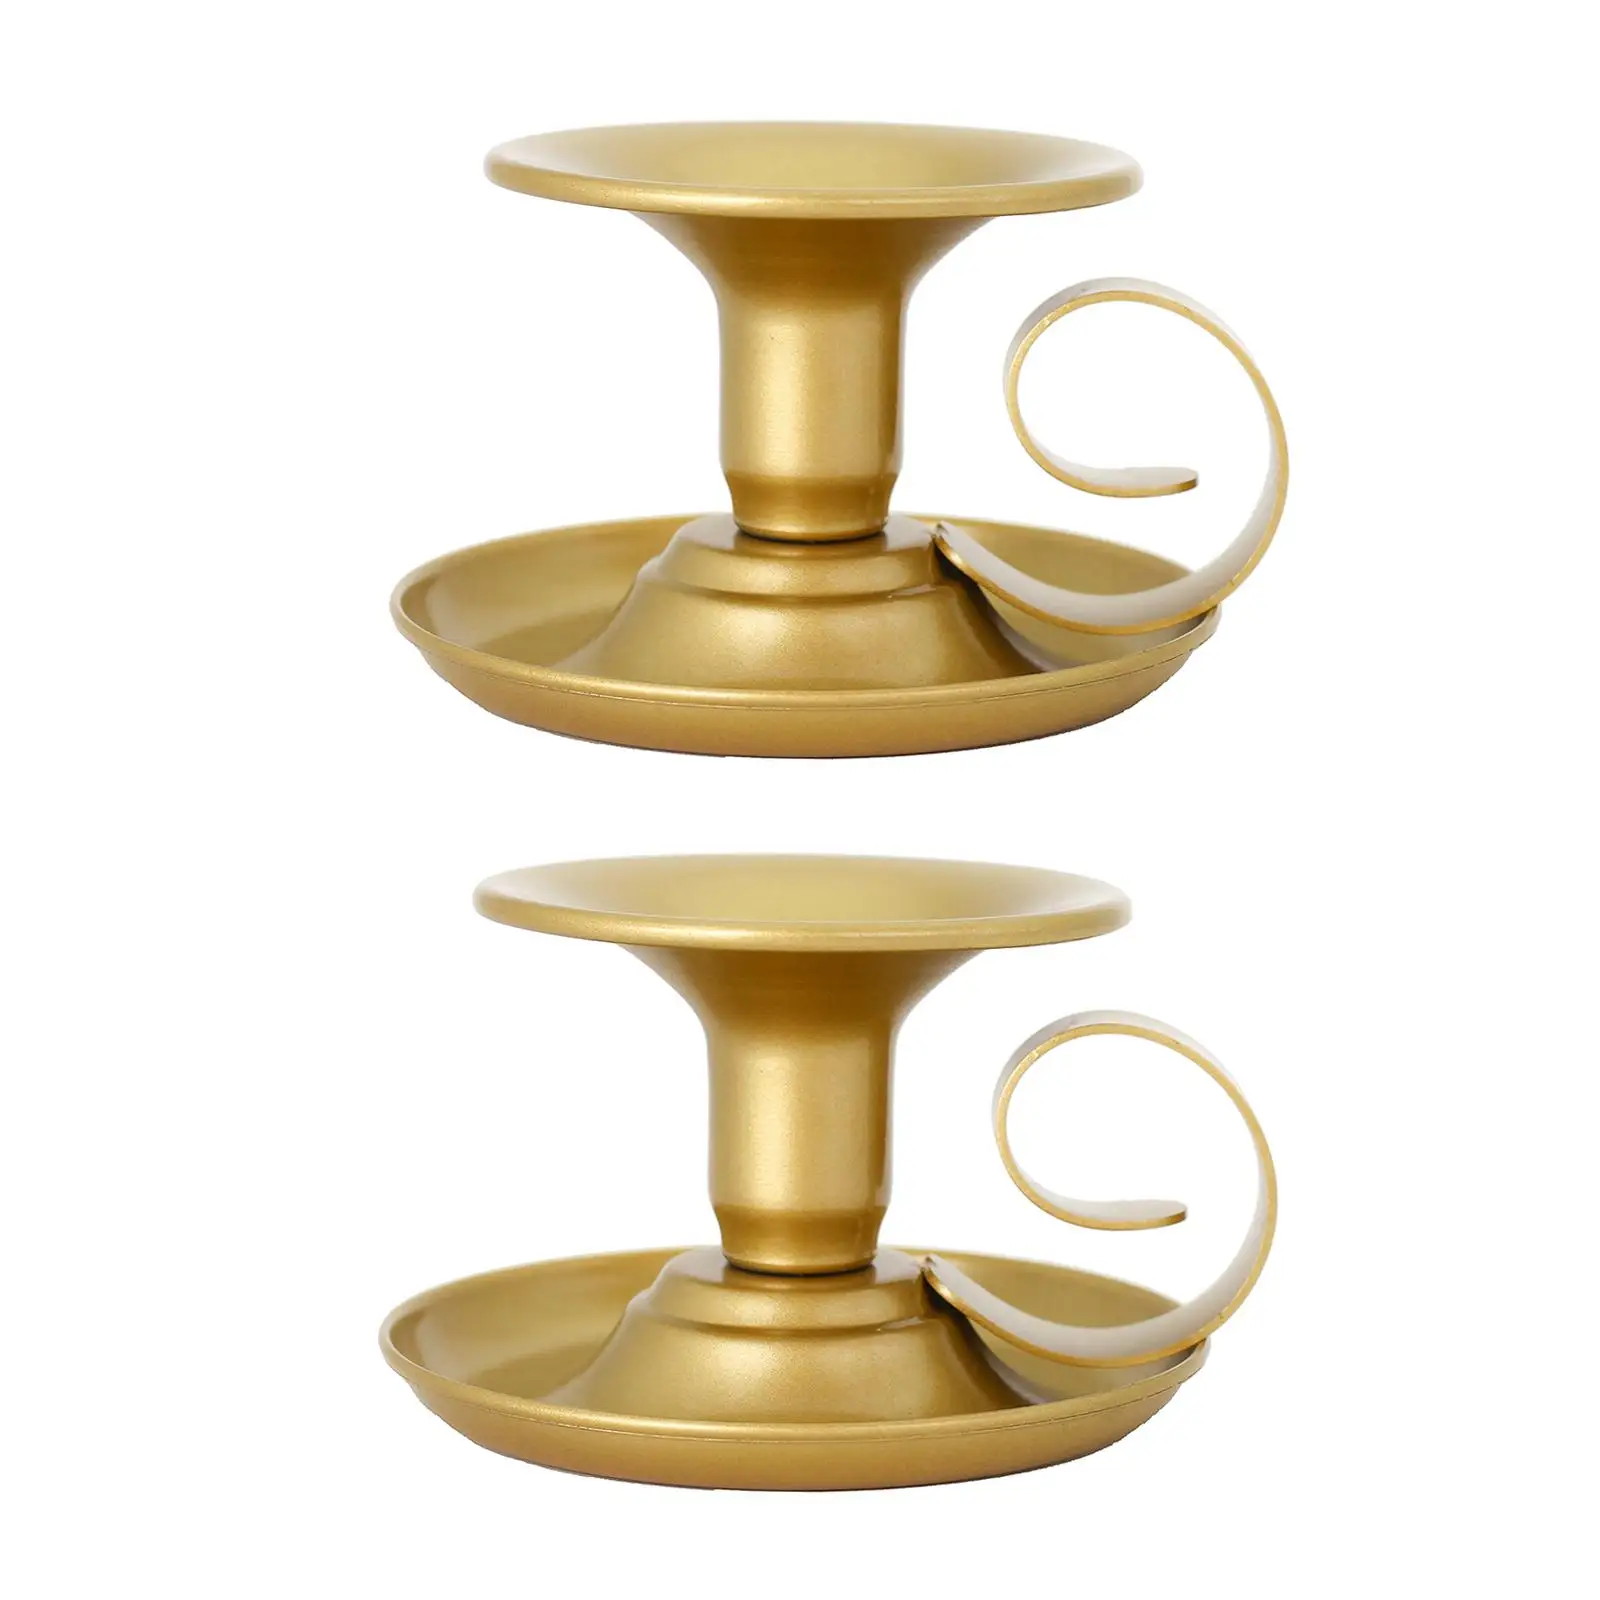 2Pcs Golden Elegant Candle Holders, Ornaments, Centerpiece, Holder, Iron for Table Dining Table Parties Tea Light Celebration